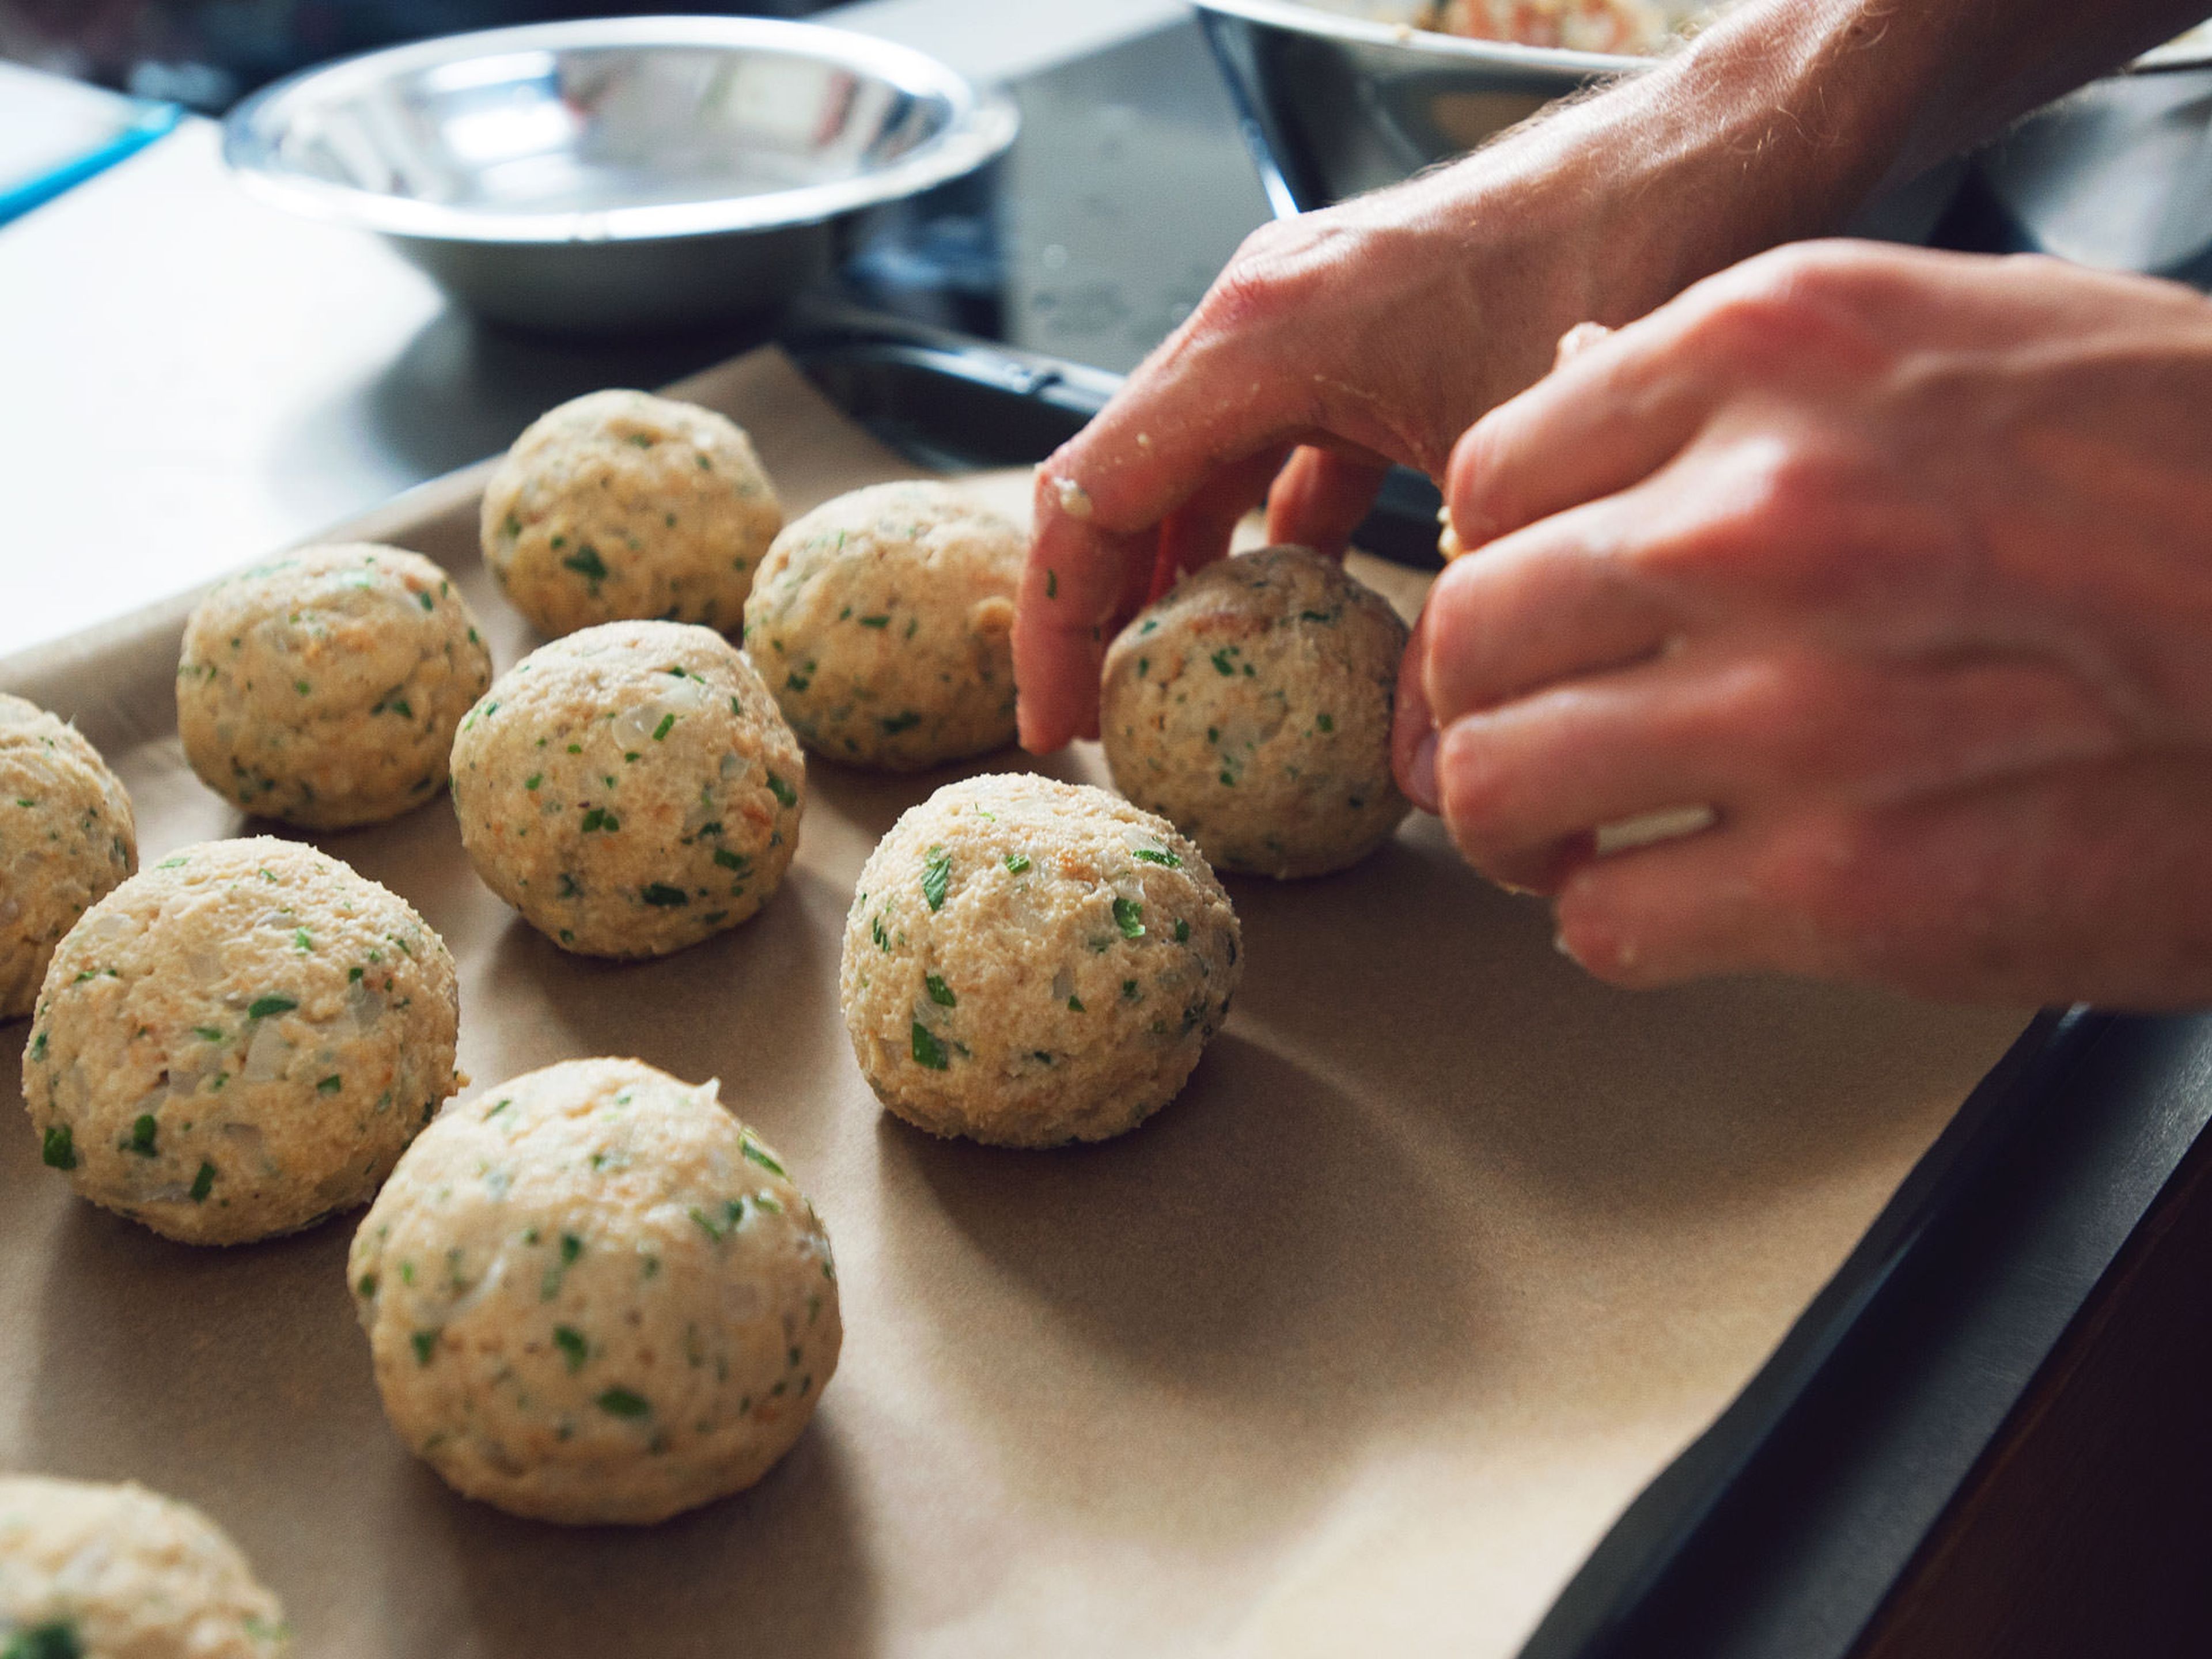 When test dumpling succeeds, form balls out of remaining dough and place them on a baking sheet lined with parchment paper. Add all bread dumplings to saucepan, being careful to arrange them so that they don’t lie on top of each other. Let them simmer for approx. 20 min. Pay attention that water doesn’t boil again.